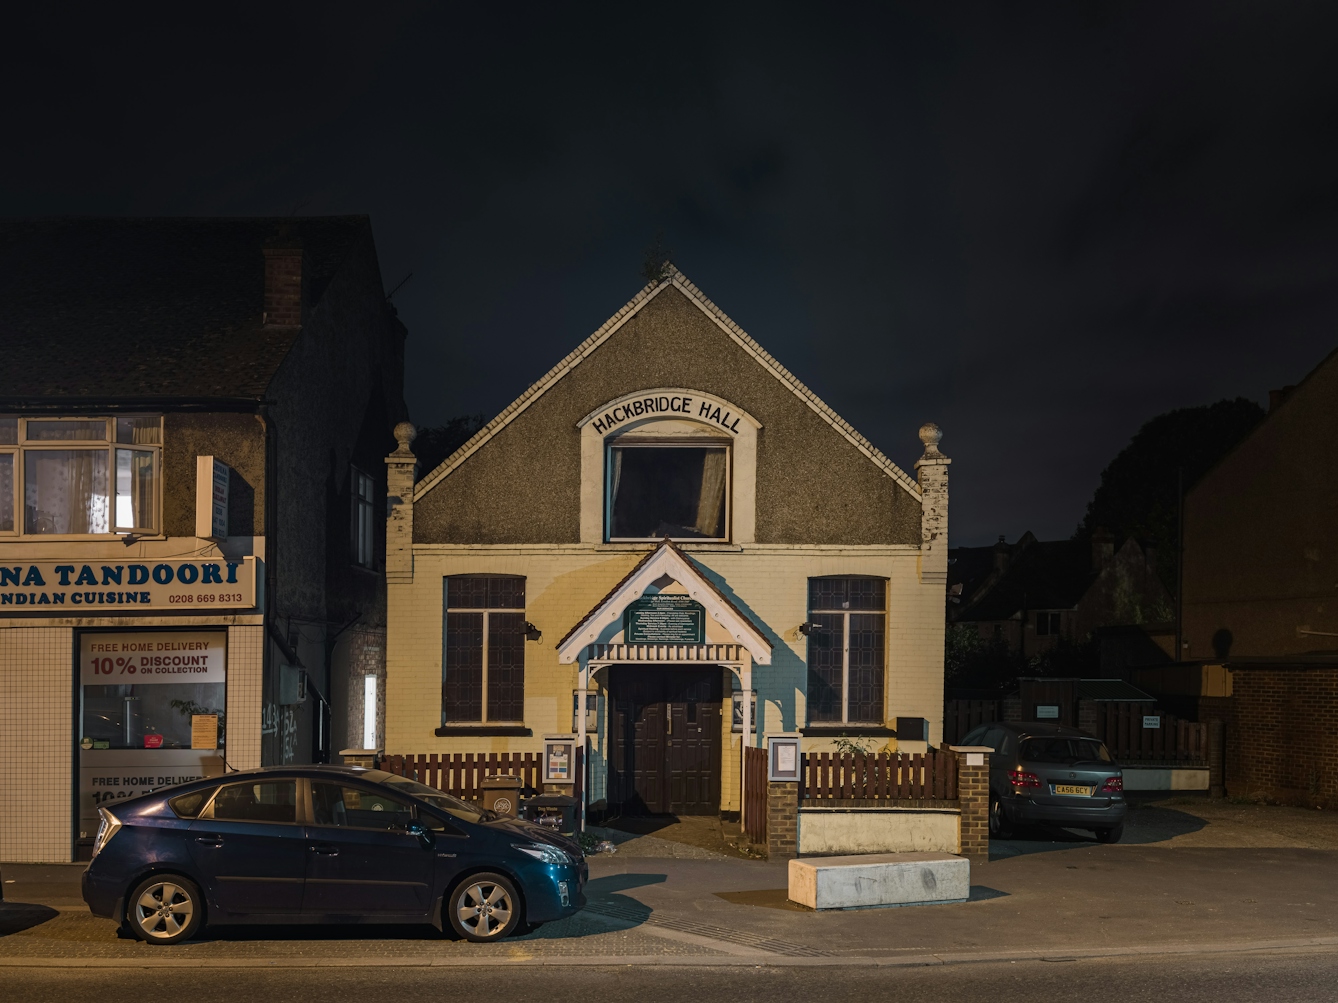 Photograph of Hackbridge Christian Spiritualist Church at night.  The double storey building is located in the centre of the frame, with a Indian cuisine restaurant to the left. of the building.  In the foreground is a blue sedan.